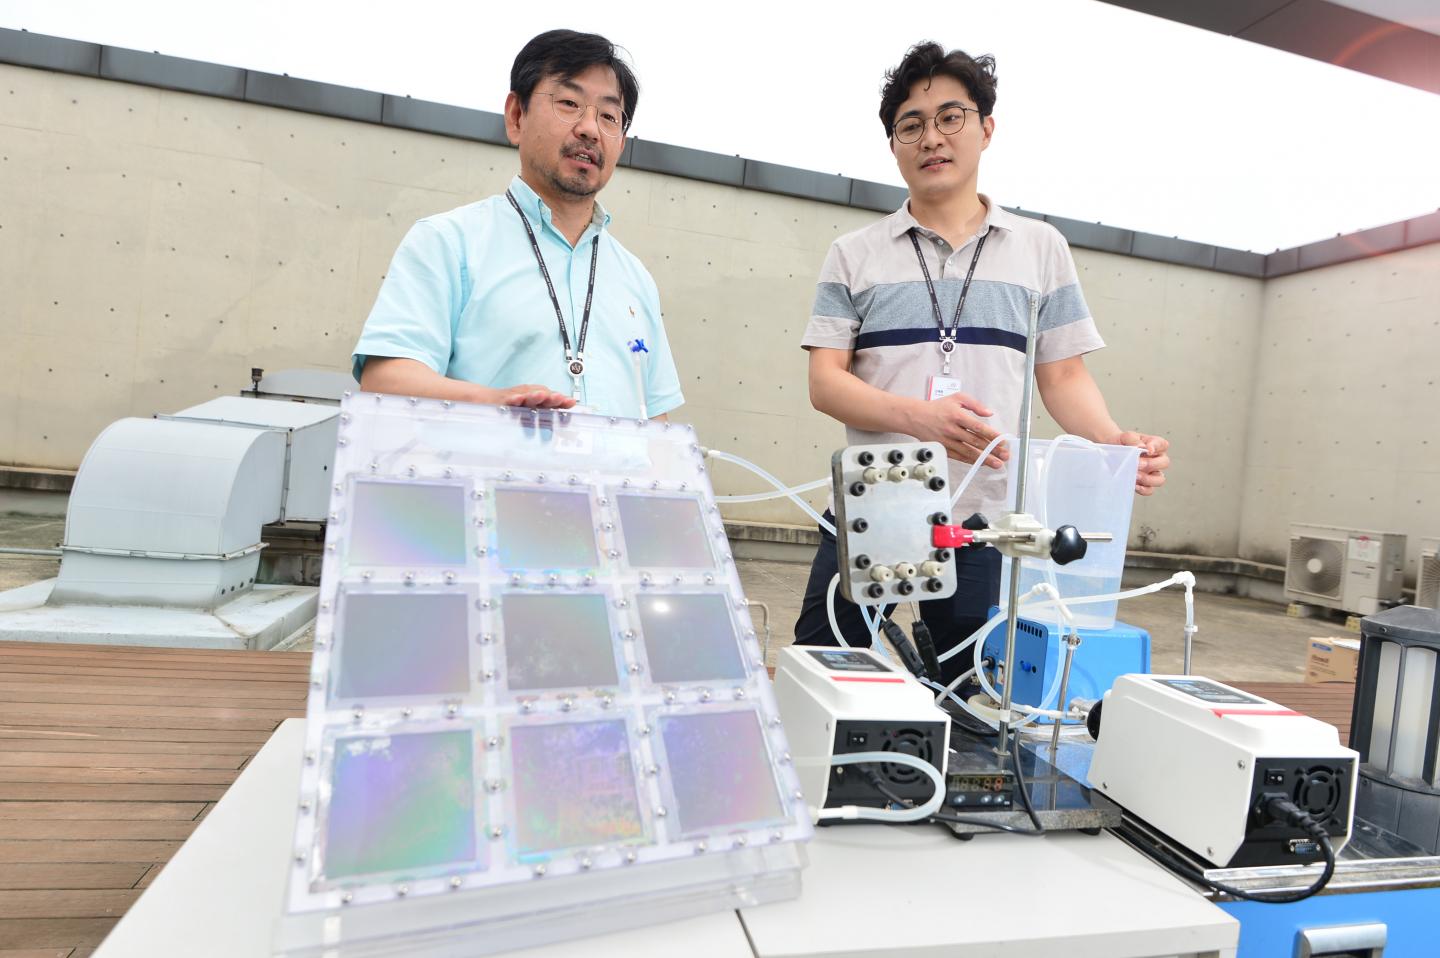 Through solar absorbers (9 panels, 5cm by 5cm in size), the team of Kyung-guen song are discussing the process of producing water at high efficiency with membrane distillation technology. Source: Korea Institue of Science and Technology